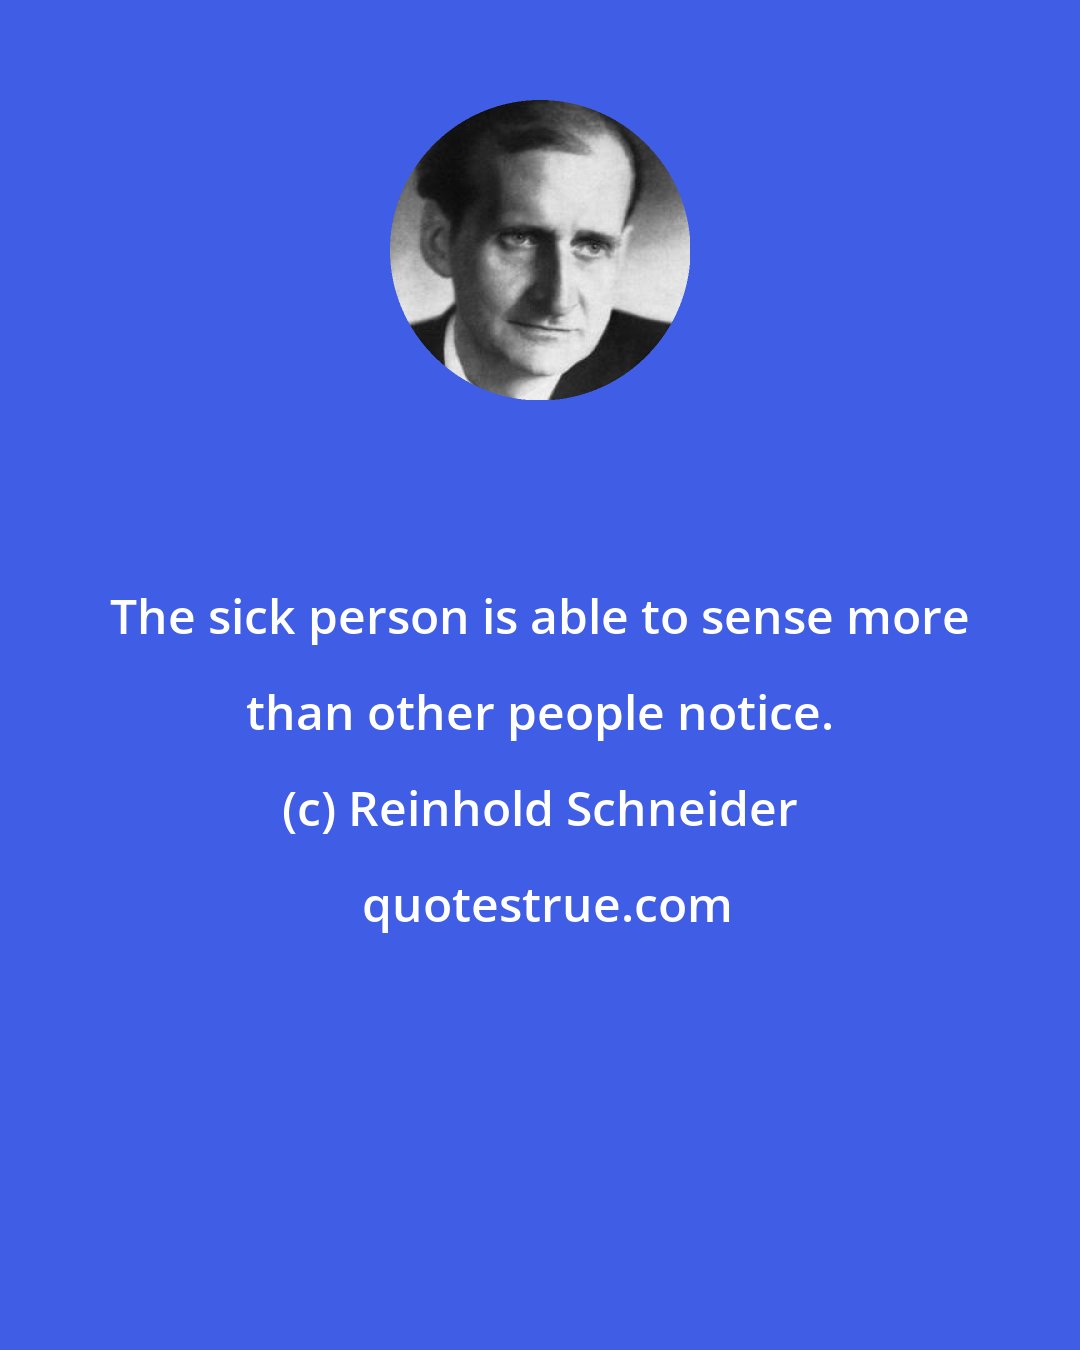 Reinhold Schneider: The sick person is able to sense more than other people notice.